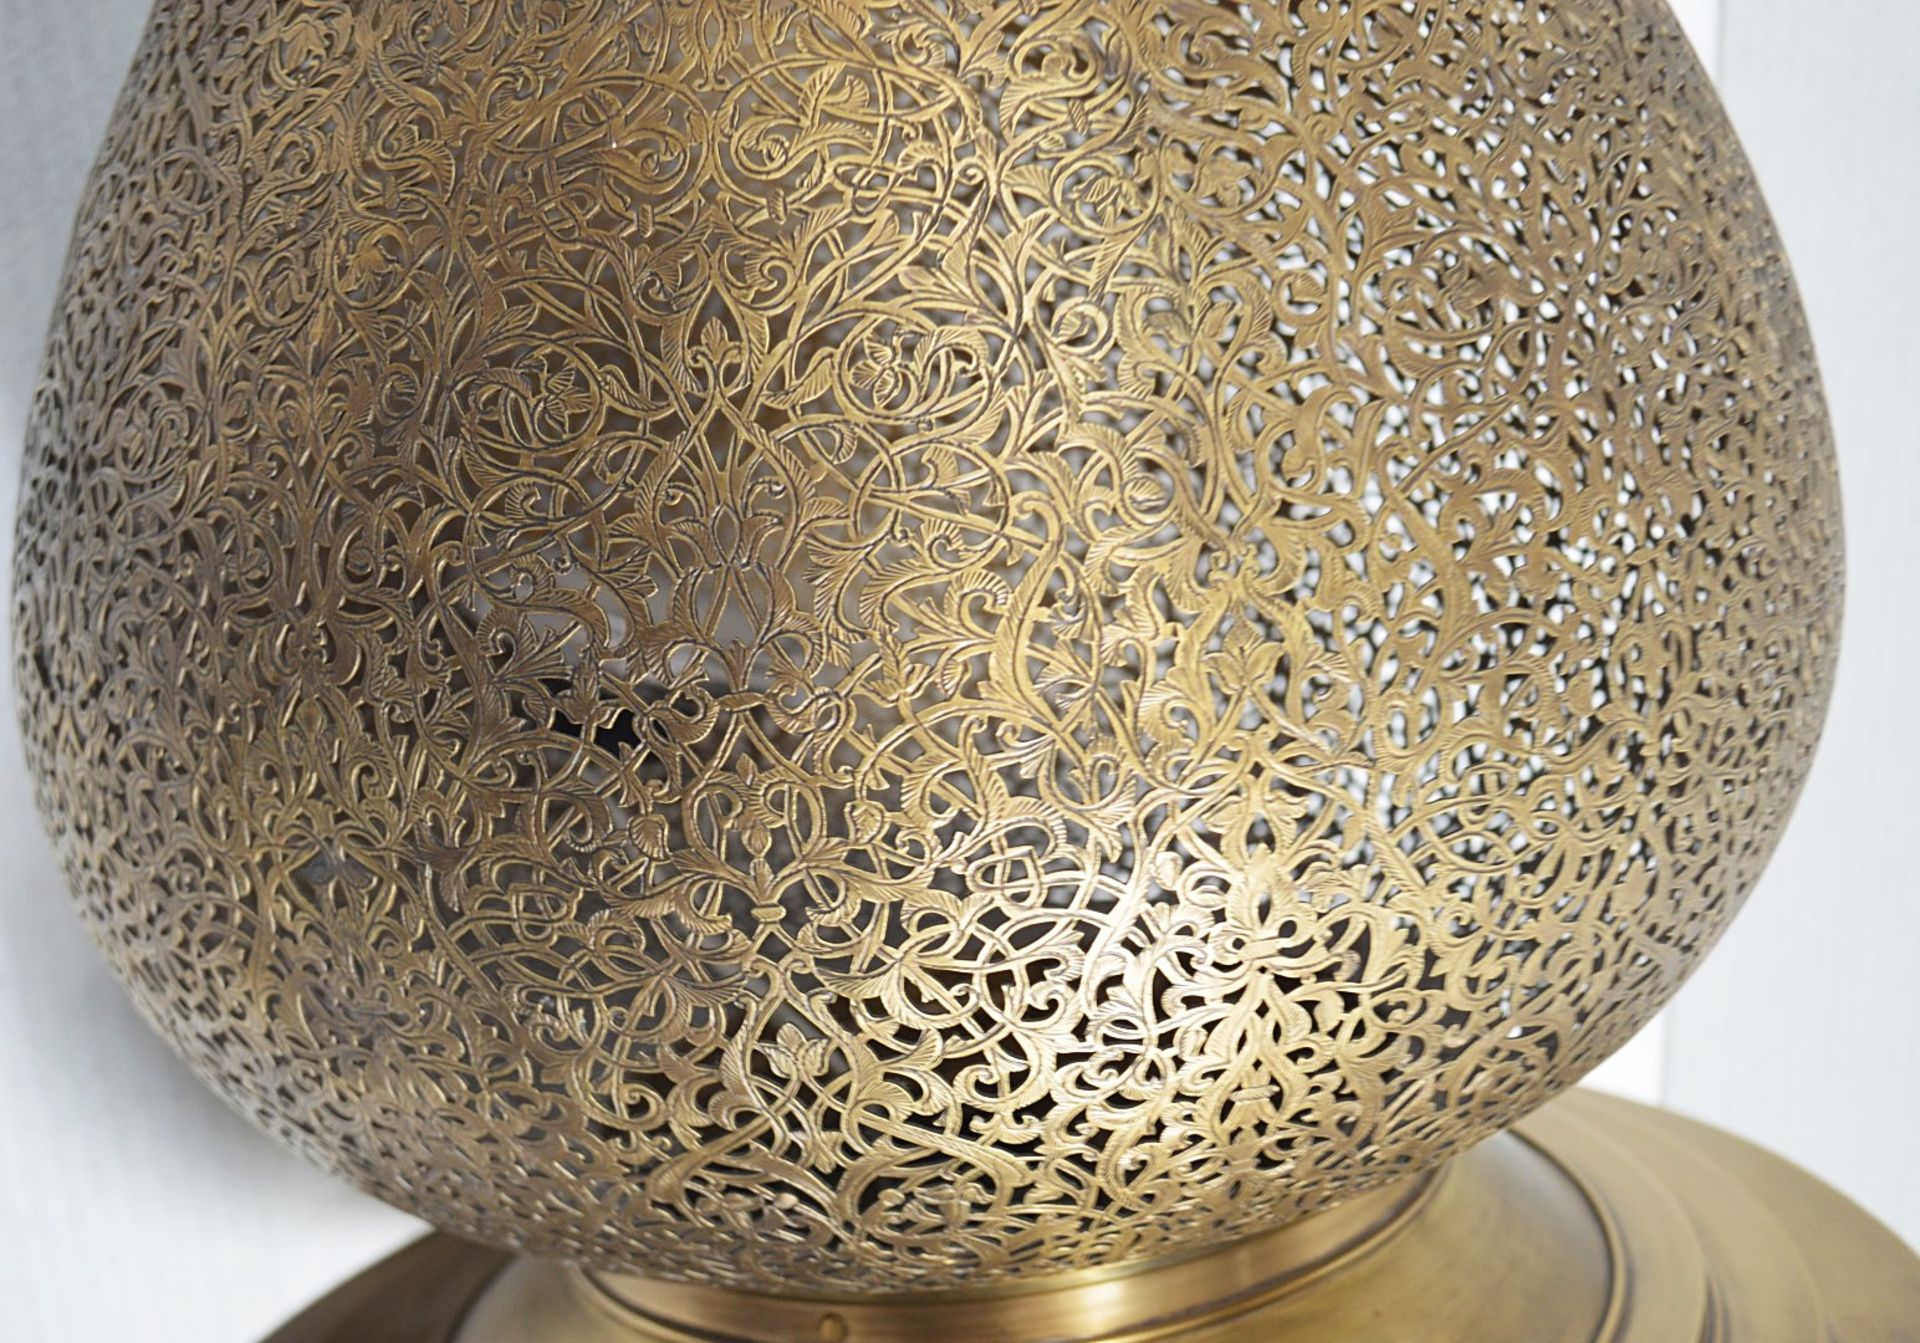 1 x Large 1.3 Metre Moroccan-style Brass Pendant Statement Light Featuring Intricate Filigree - Image 6 of 9